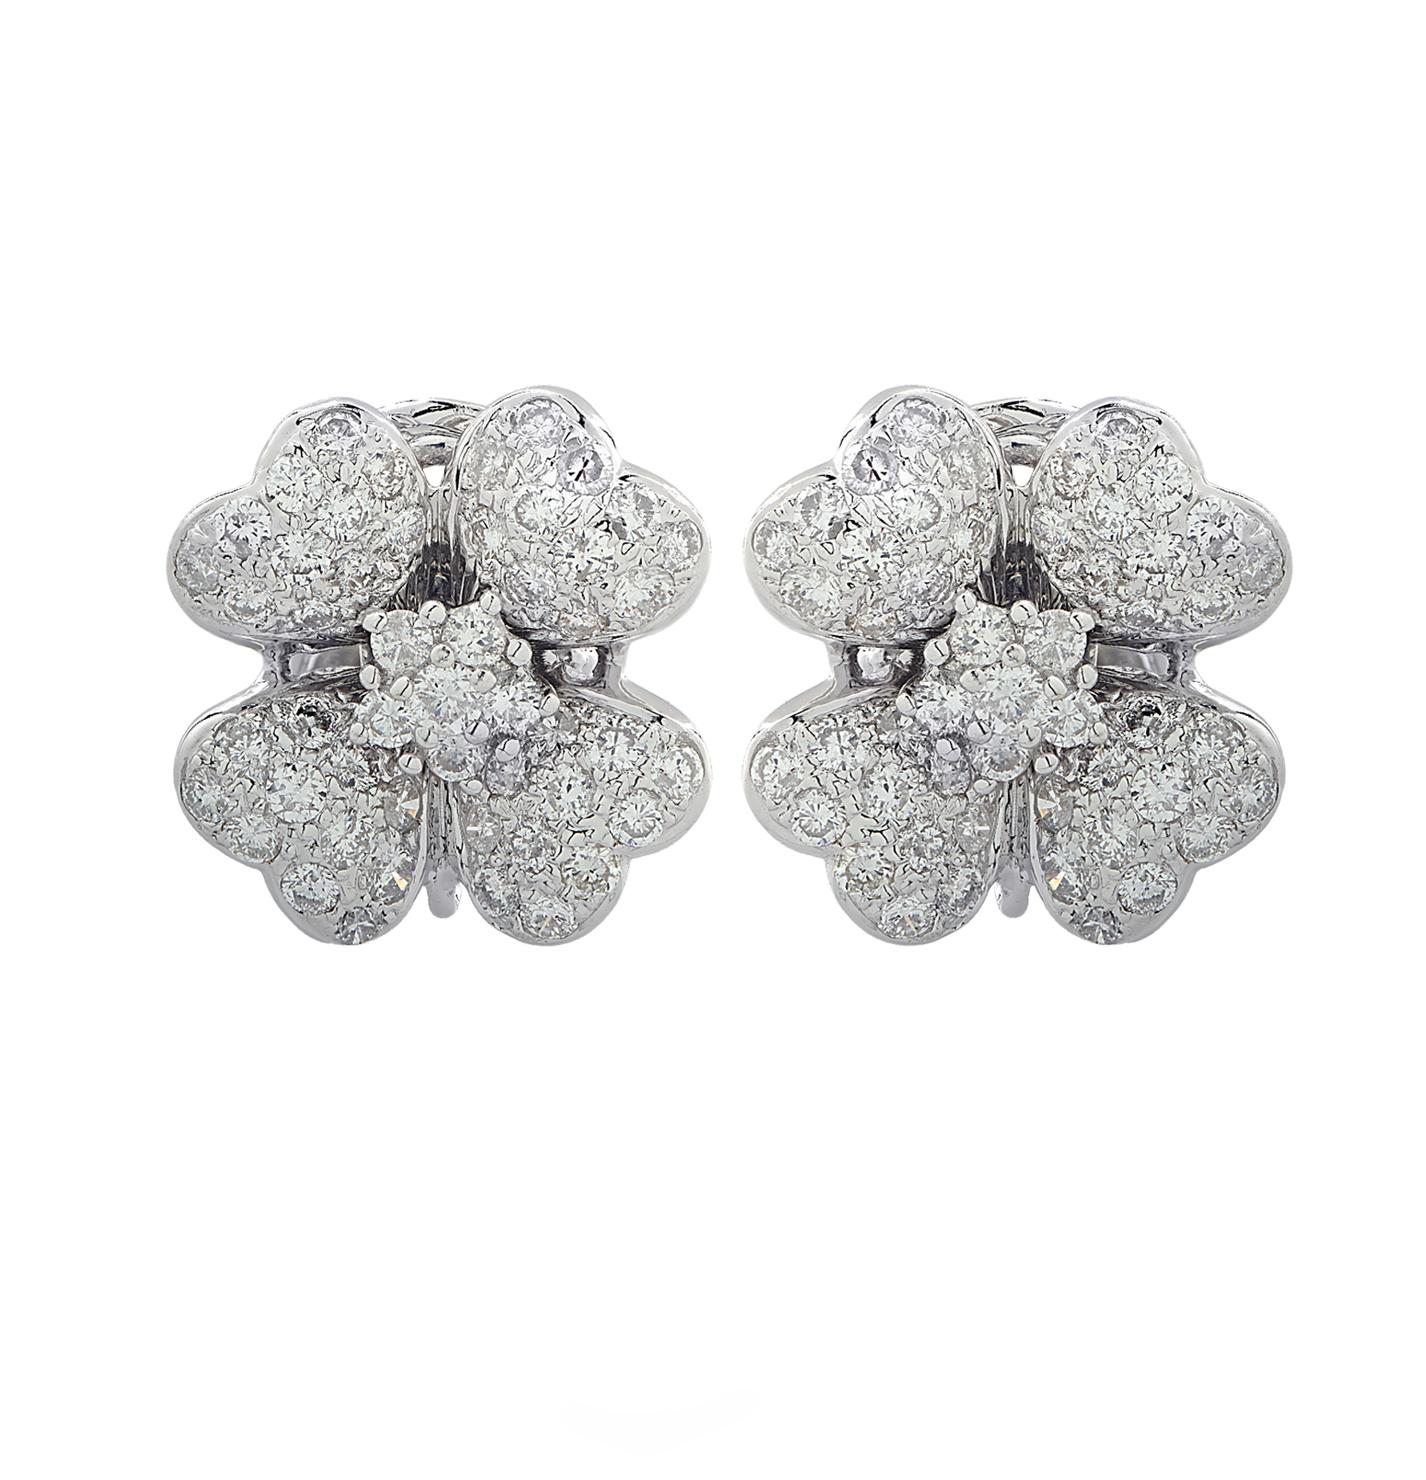 Delightful earring crafted in 18 karat white gold, featuring 100 round brilliant cut diamonds weighing approximately 2.5 carats total, G color, VS-SI clarity. The earrings are fashioned into four leaf clovers, adorned with diamonds, capturing the